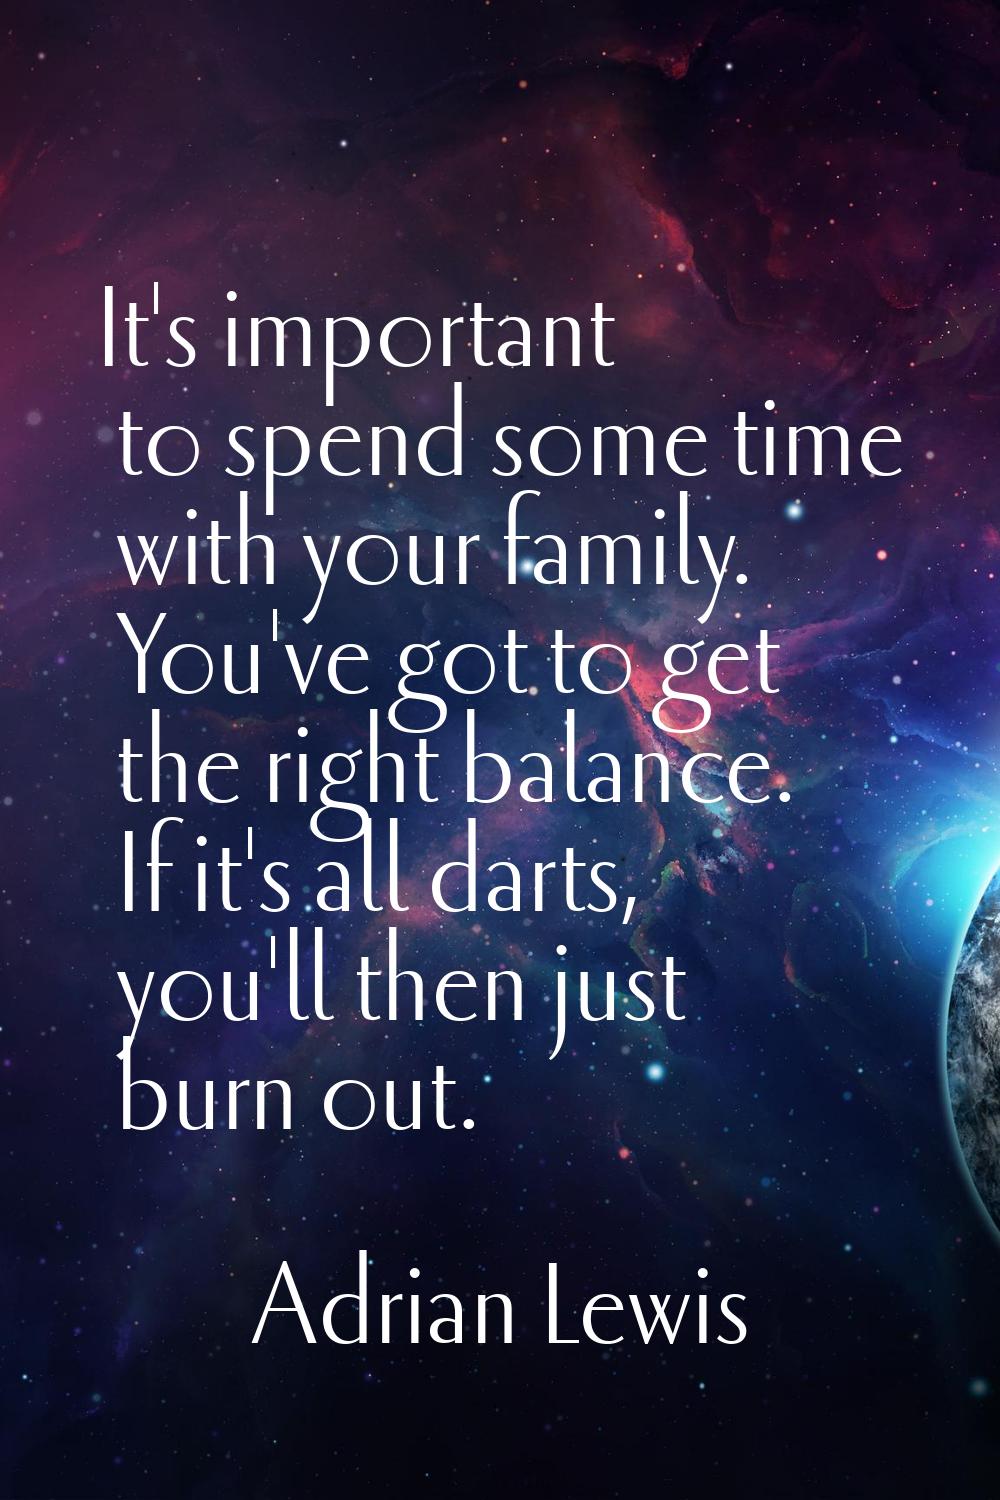 It's important to spend some time with your family. You've got to get the right balance. If it's al